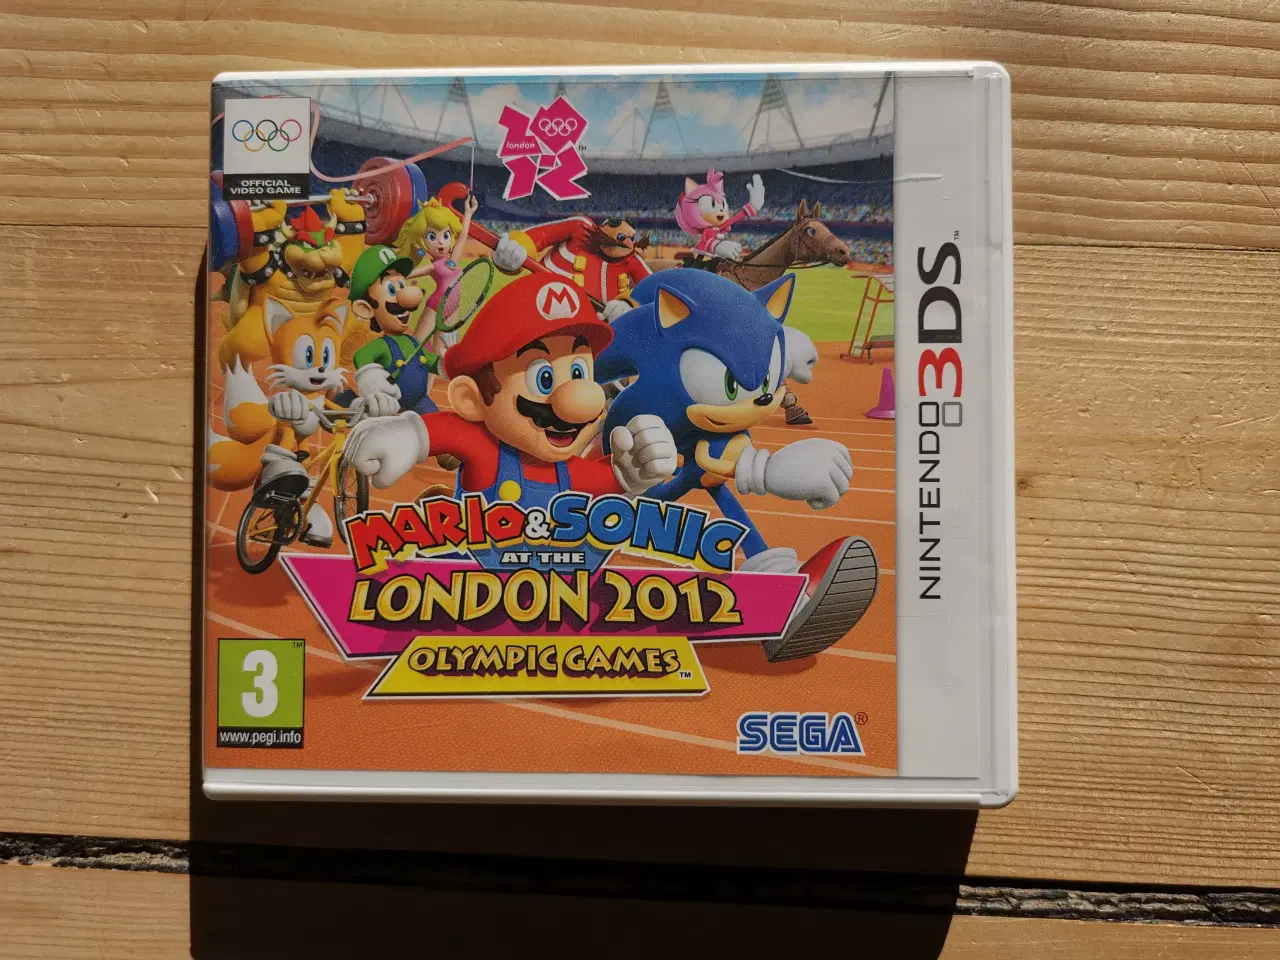 Billede 1 - Mario & Sonic at the London 2012 Olympic Games